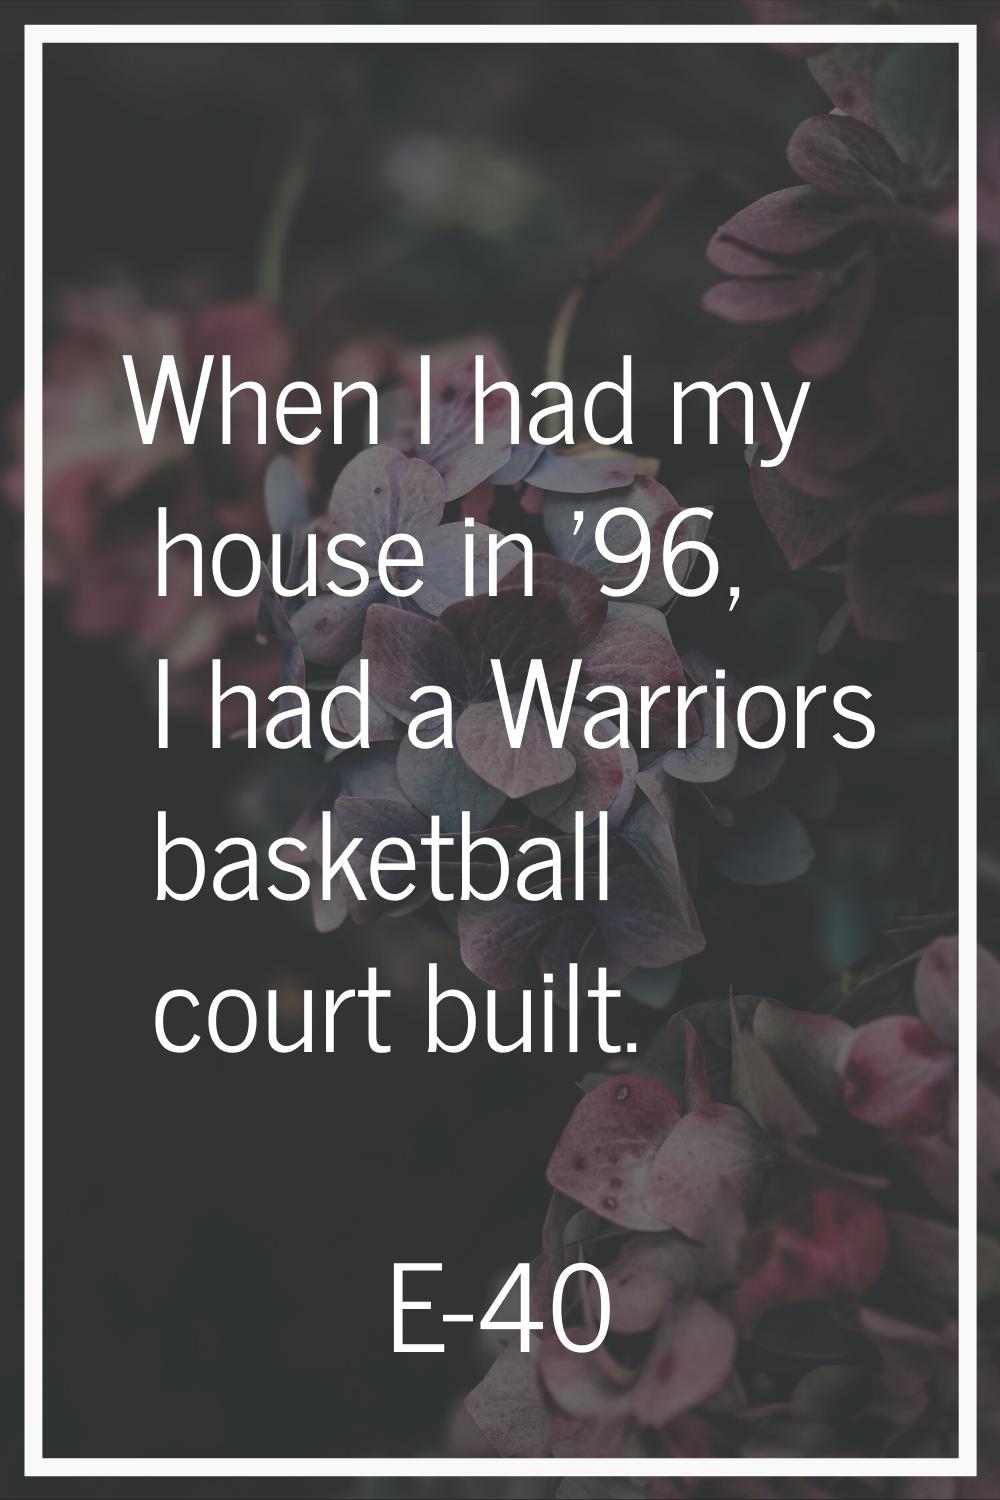 When I had my house in '96, I had a Warriors basketball court built.